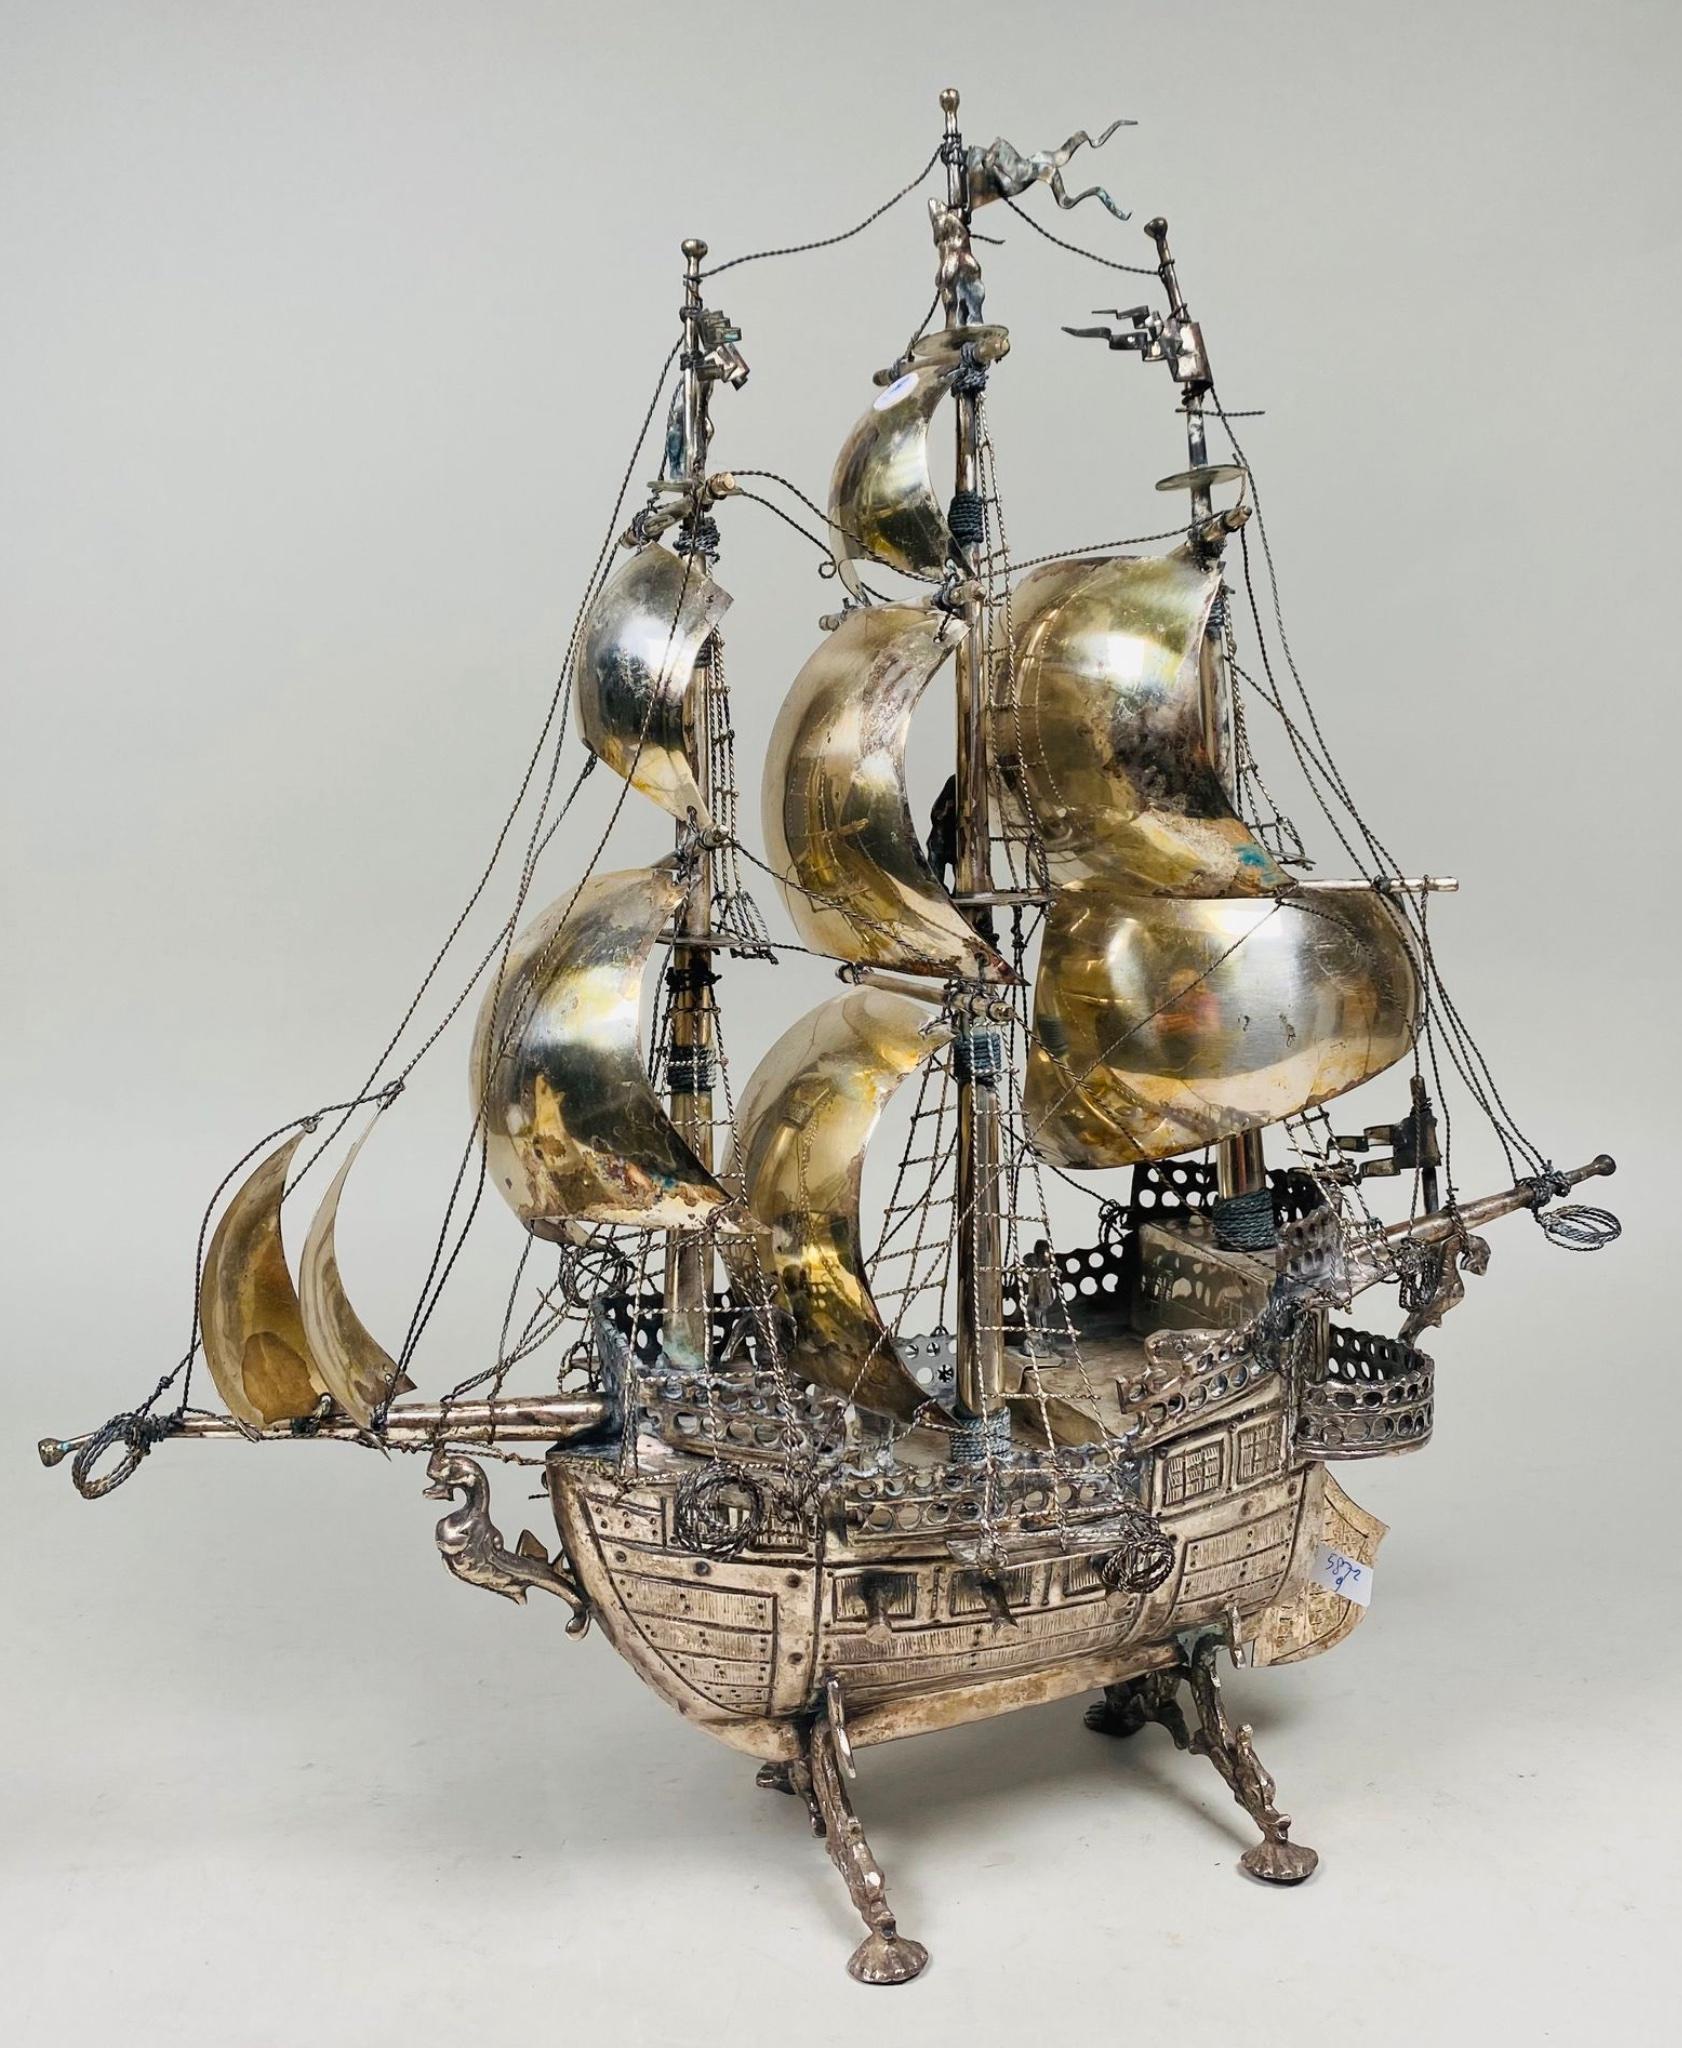 A nef is an extravagant table ornament and container used in the Middle Ages and Renaissance, made of precious metals in the shape of a ship. 
Important and opulent south Europa silver plate nef. 
The nef takes the form of galleo: Three masts and